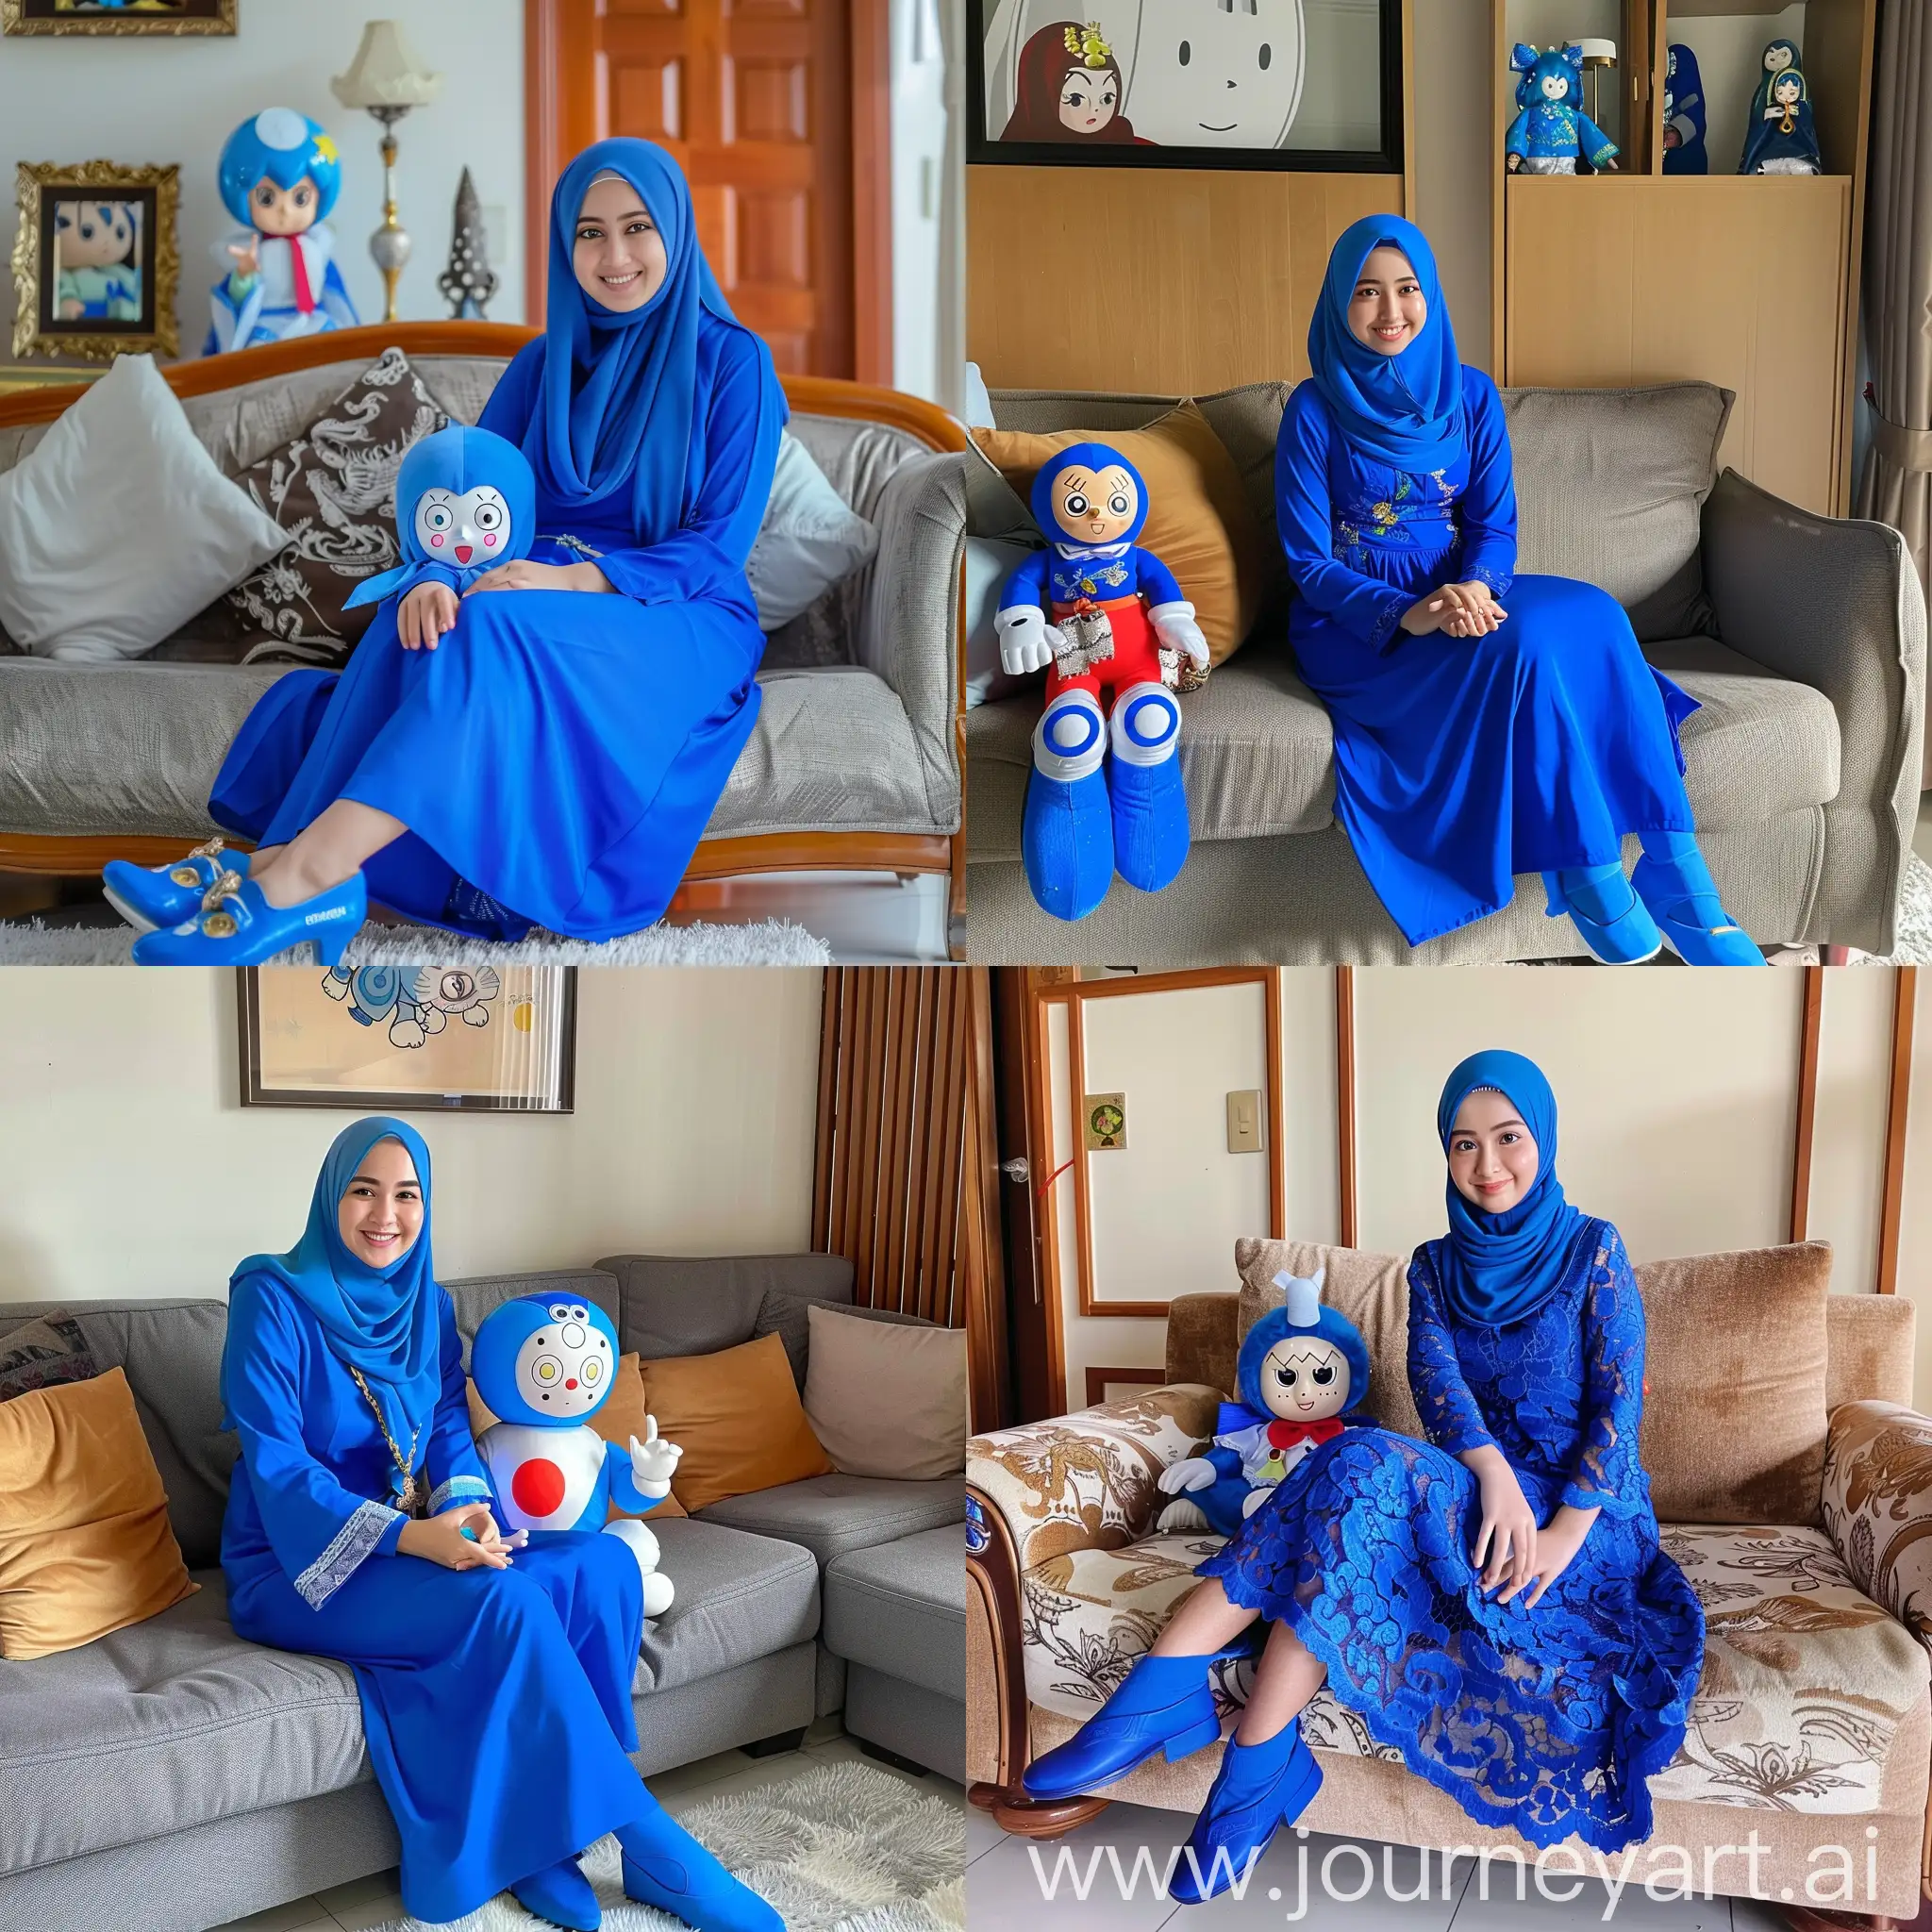 A 32-year old hijab-wearing muslim girl Indonesia,face handsome wearing a blue dress. Wearing blue shoes in a duppata siting on the sofa with a DORAEMON doll, 